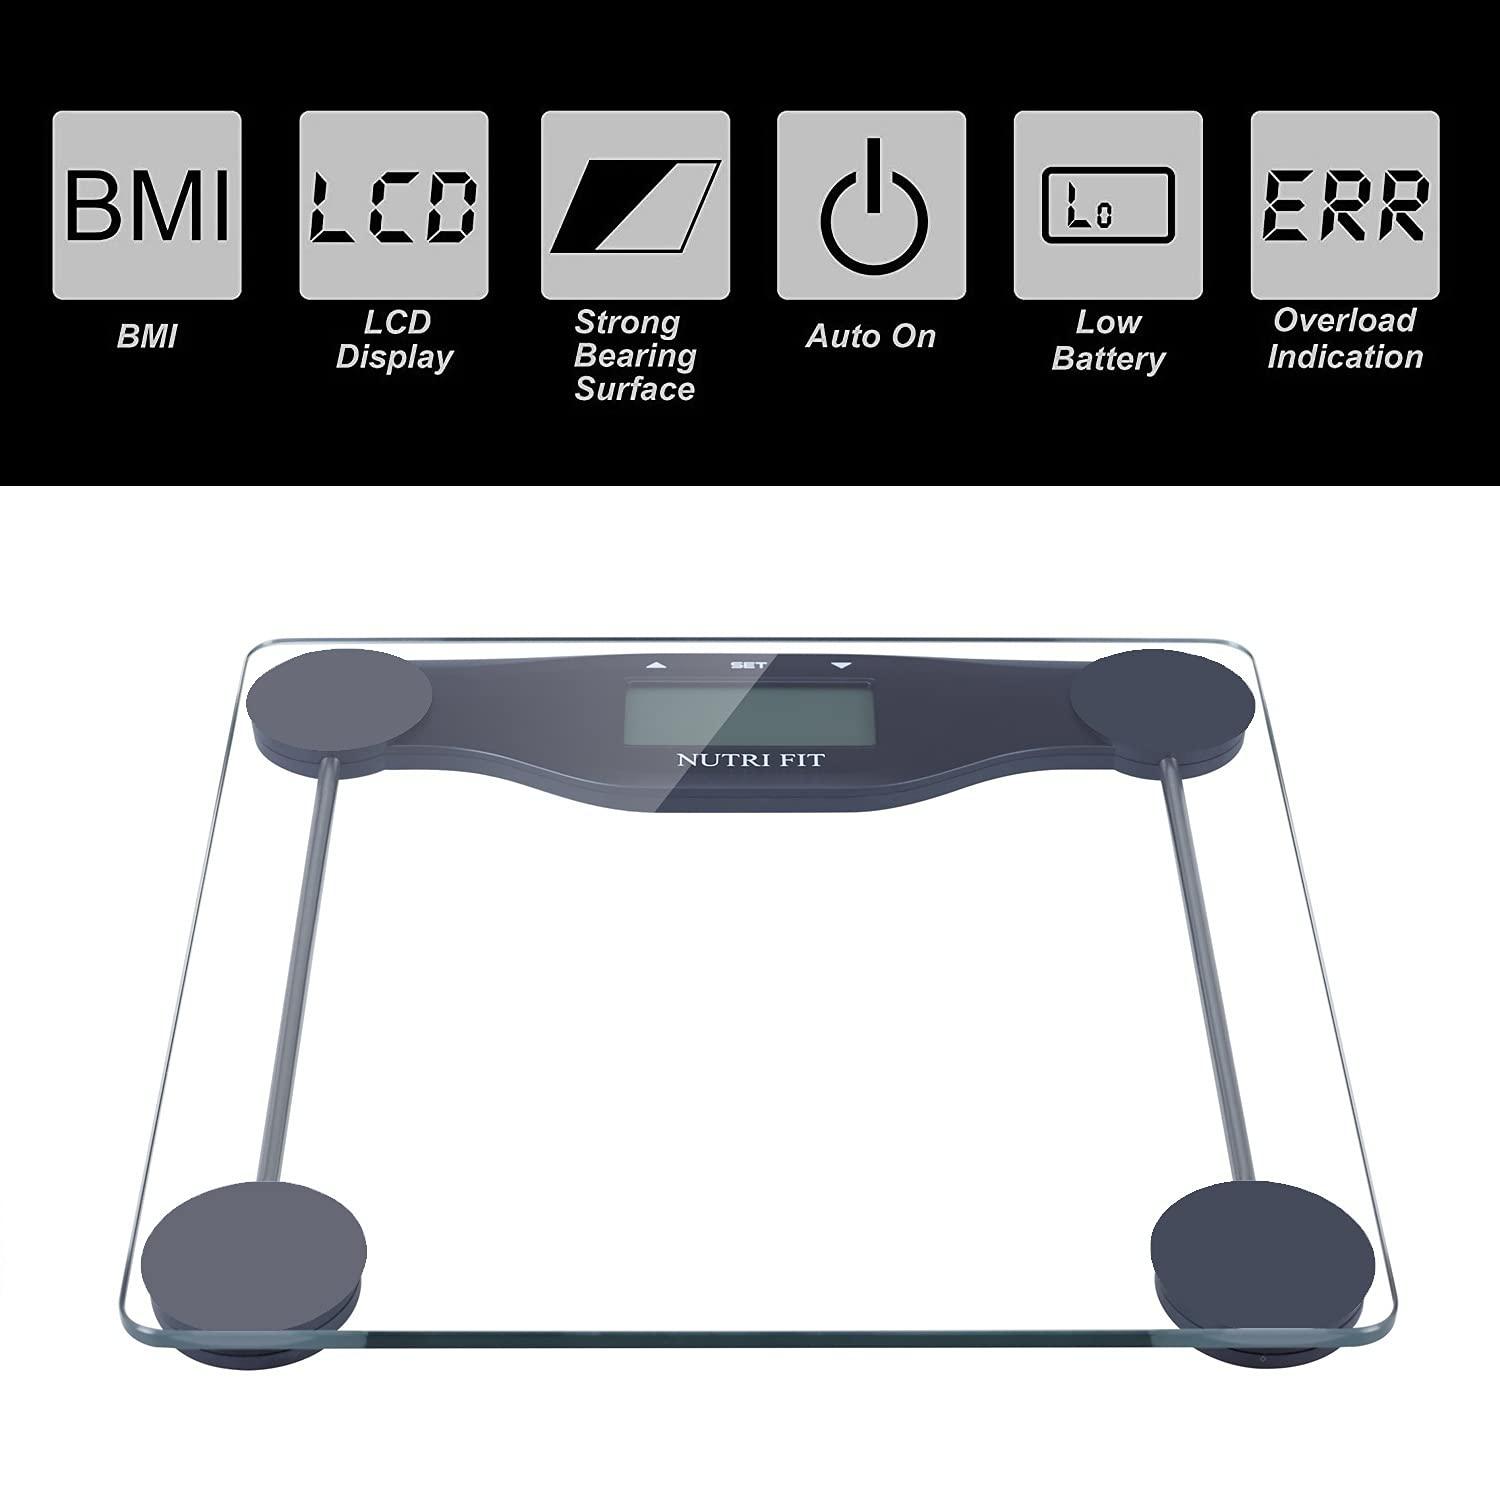 digital body weight bathroom scale bmi, accurate weight measurements scale, large backlight display and step-on technology,400 pounds,body tape measure  included (bmi) 